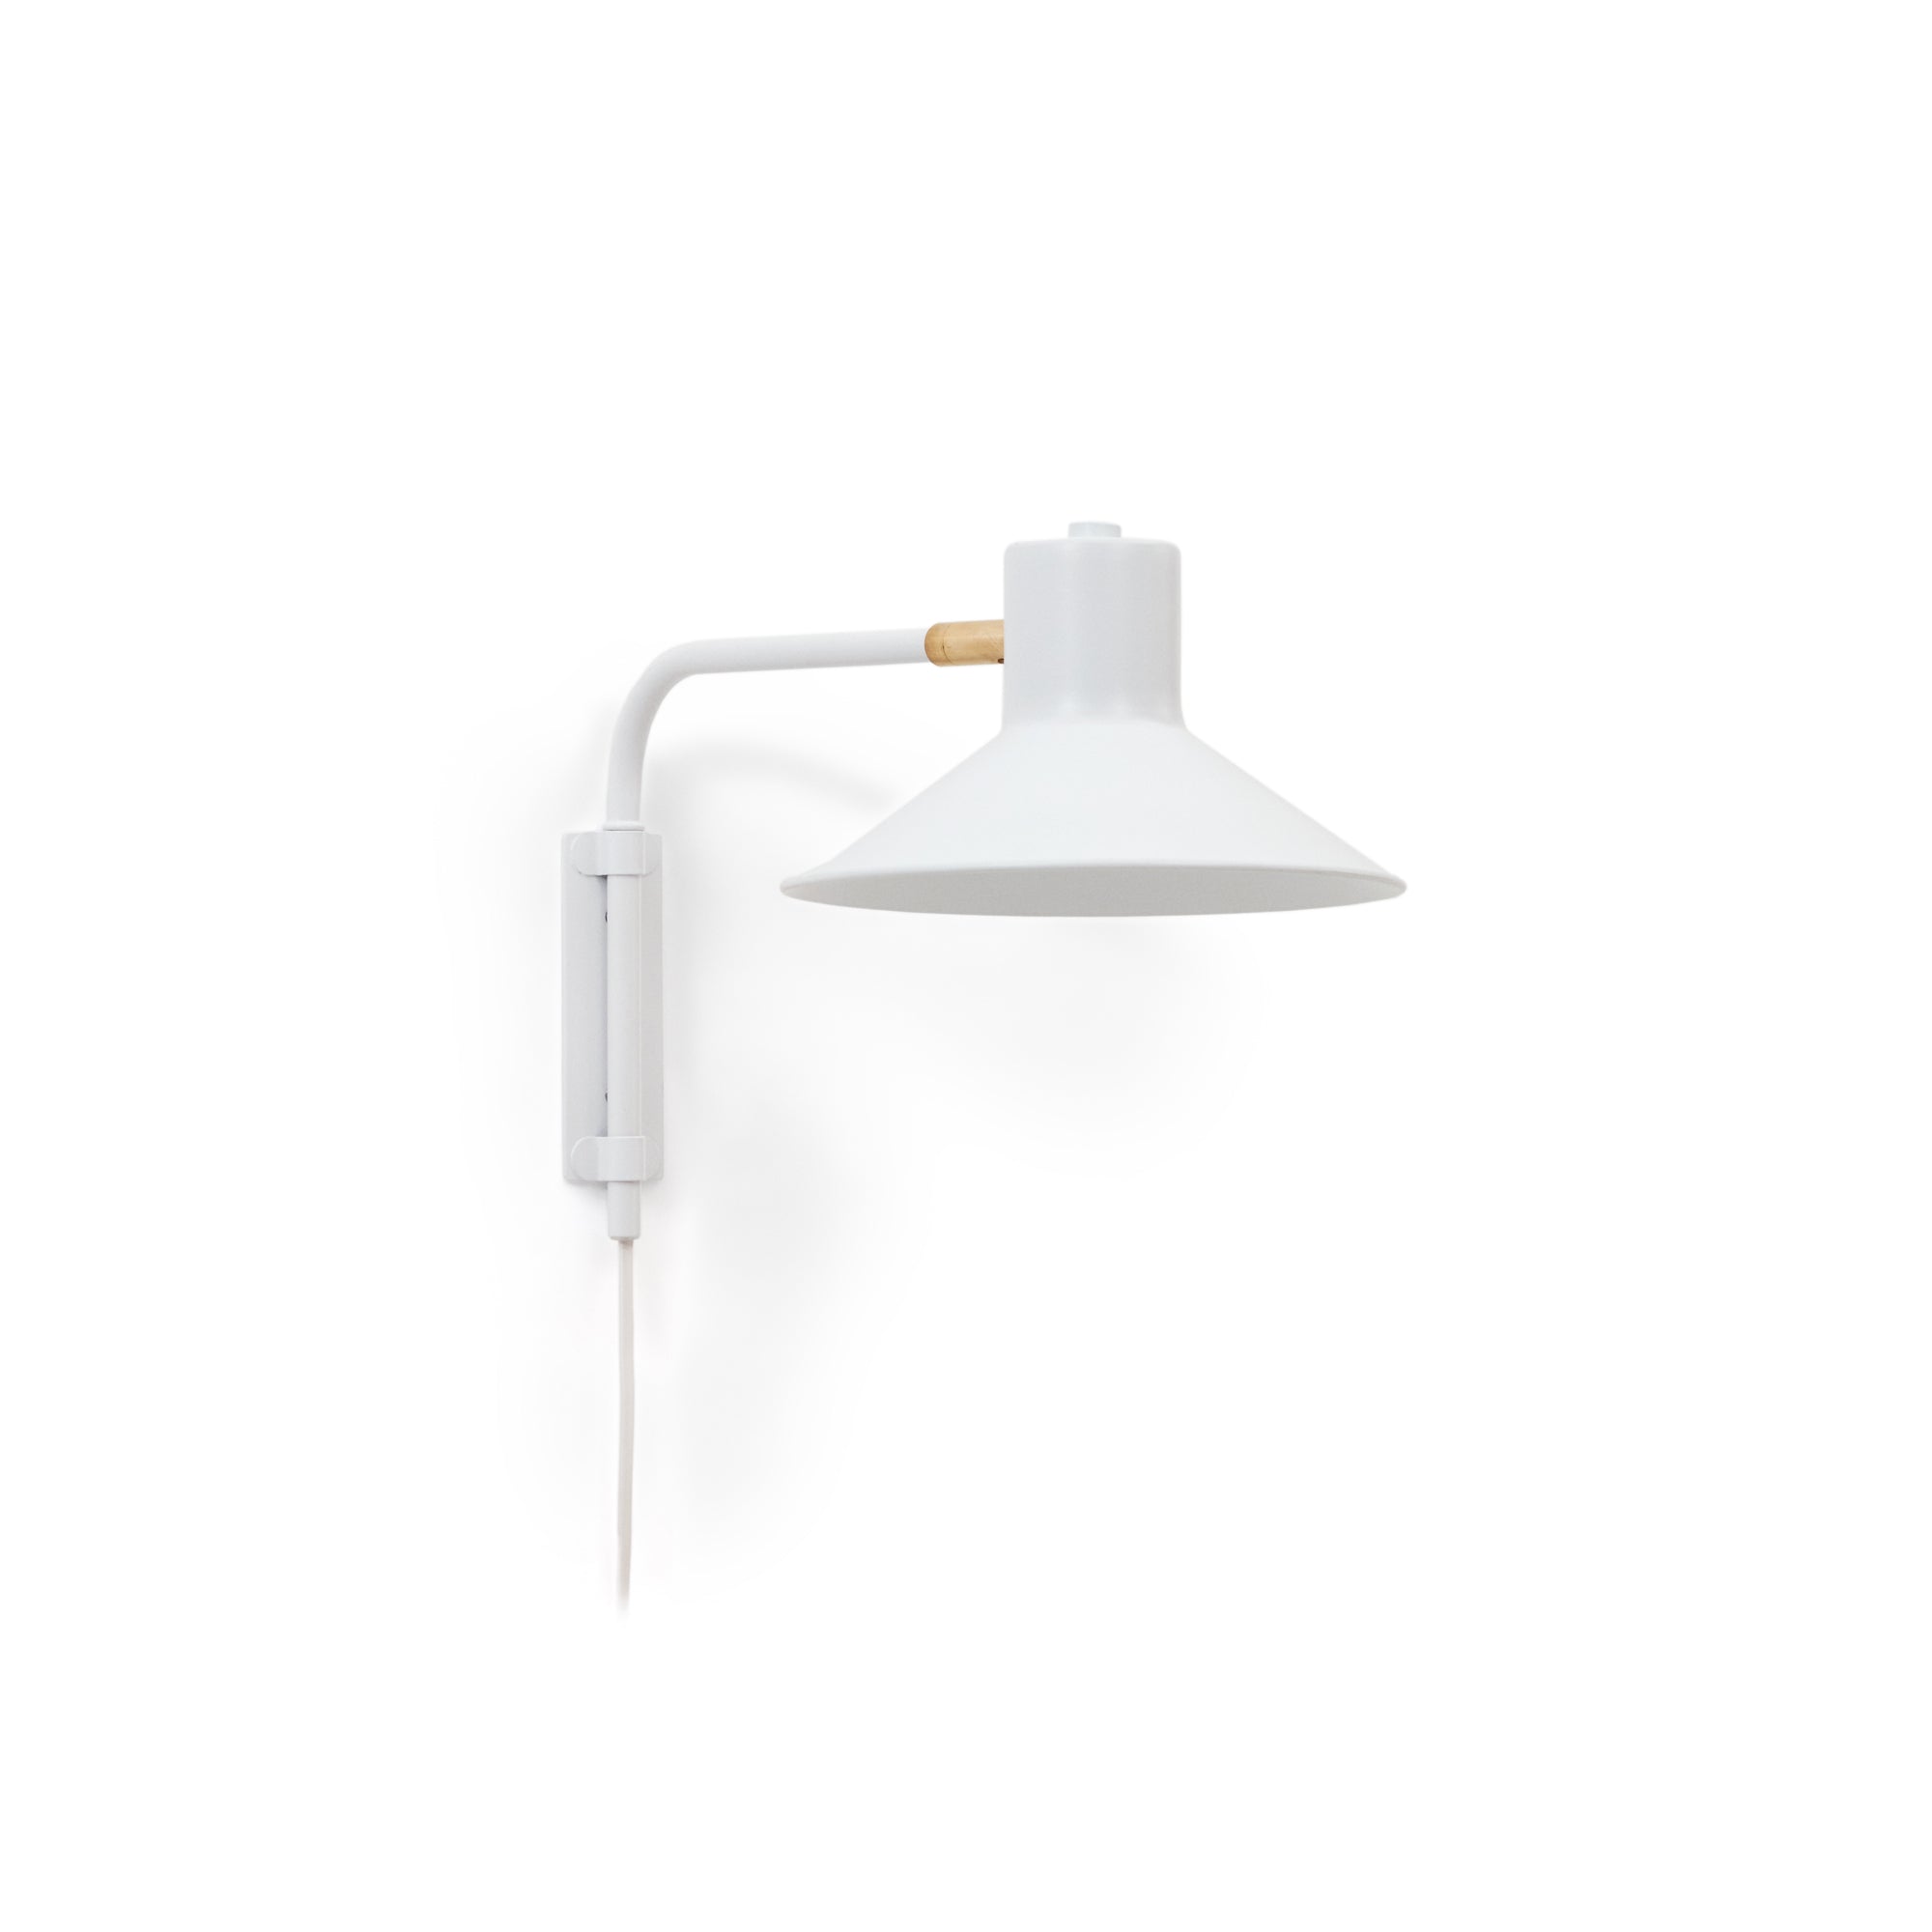 Aria small steel wall light with white finish